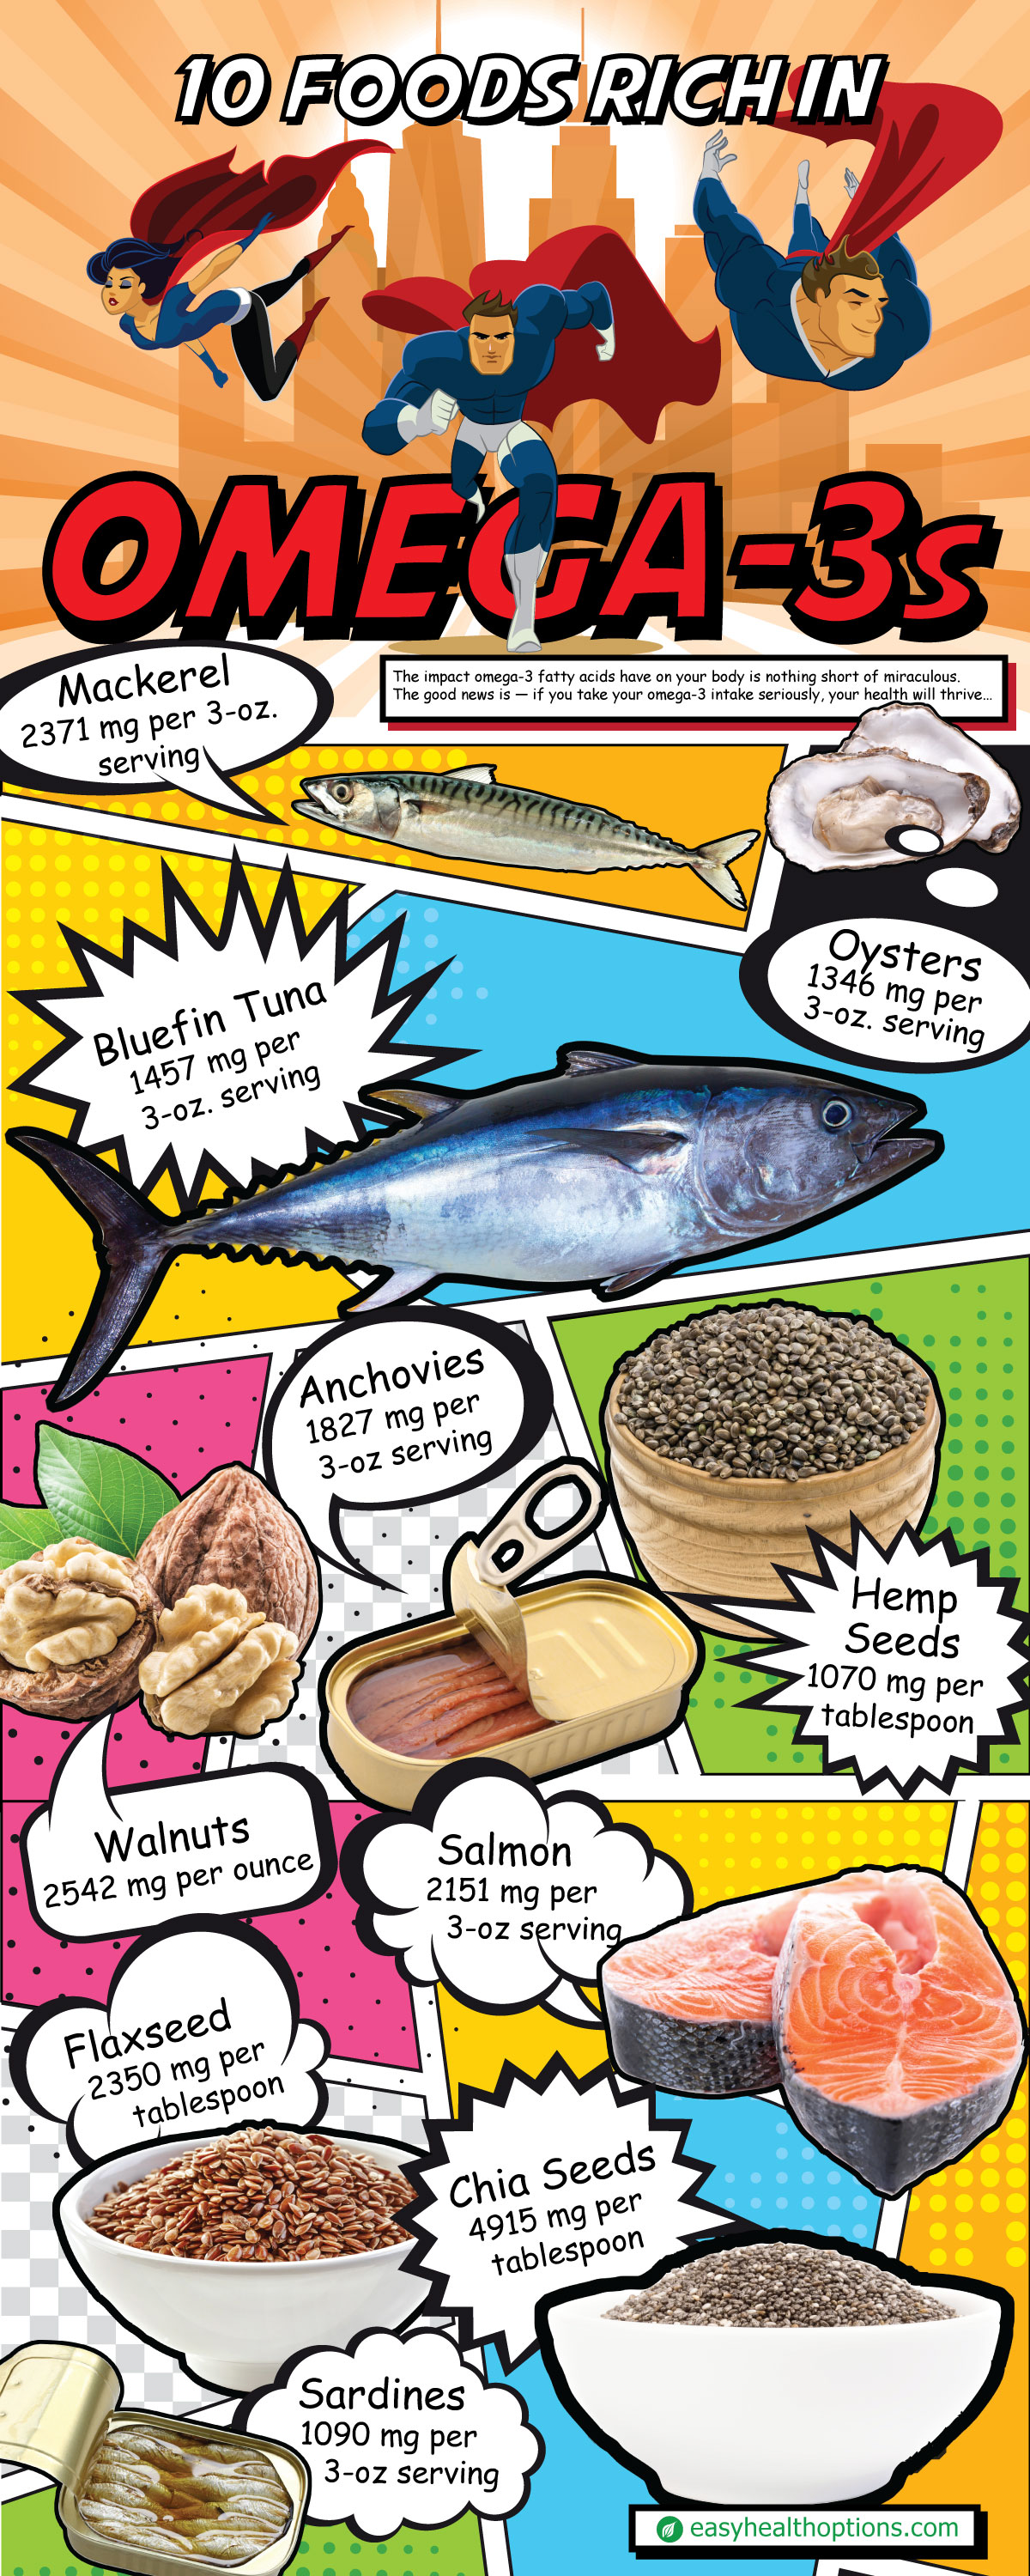 10 foods rich in omega-3s [infographic]